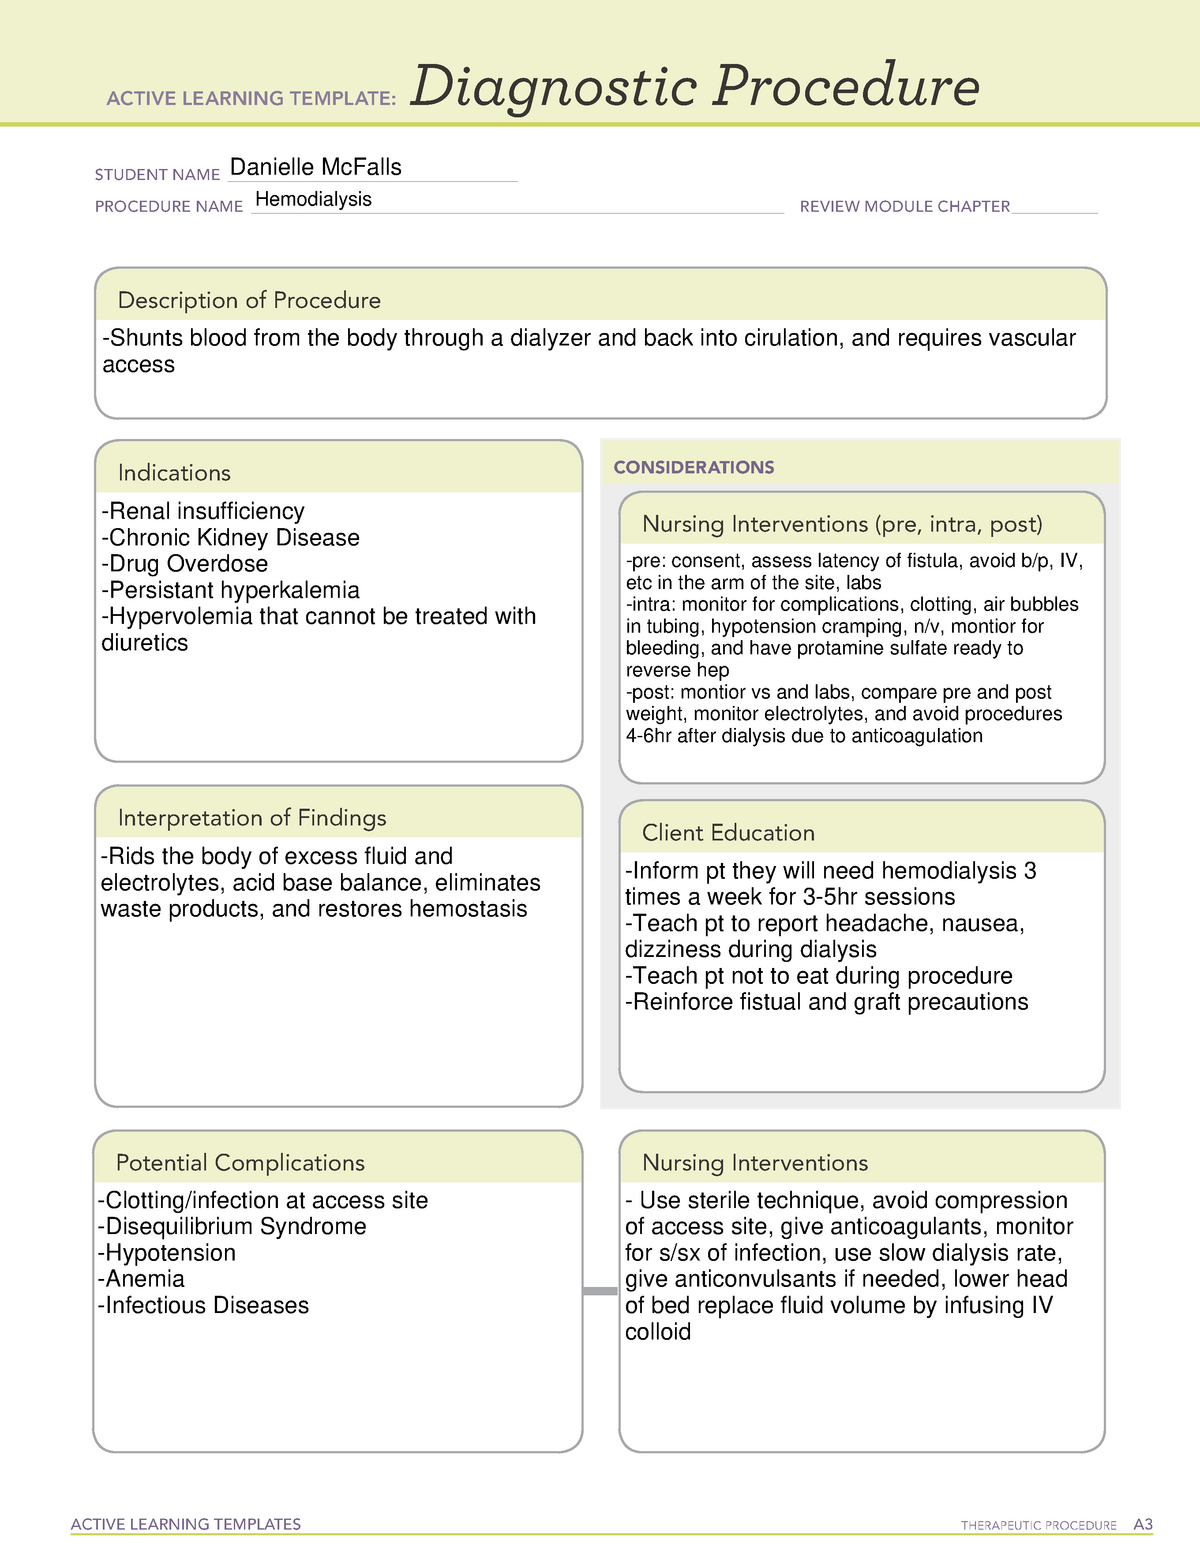 Hemodialysis Template ACTIVE LEARNING TEMPLATES THERAPEUTIC PROCEDURE